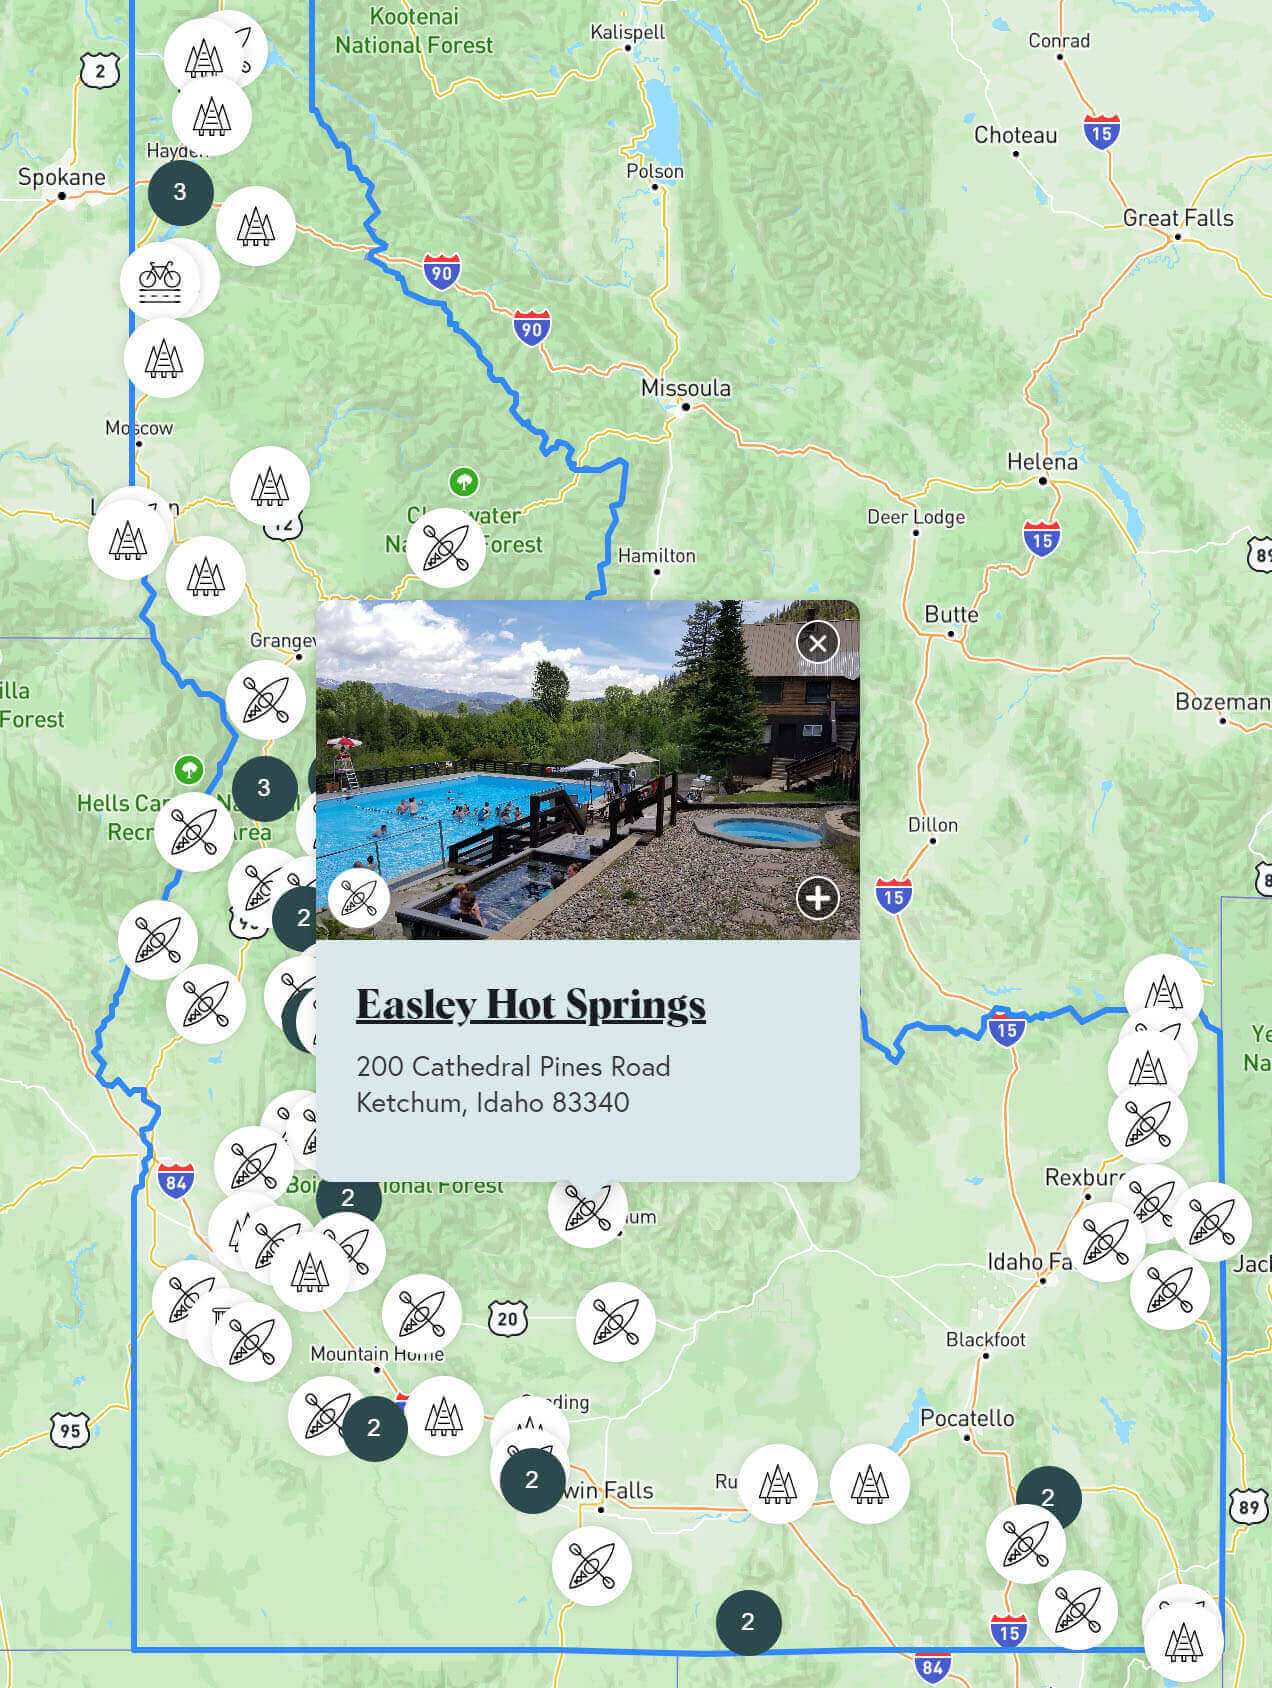 An Idaho hot springs map showing the location of Easley Hot Springs.